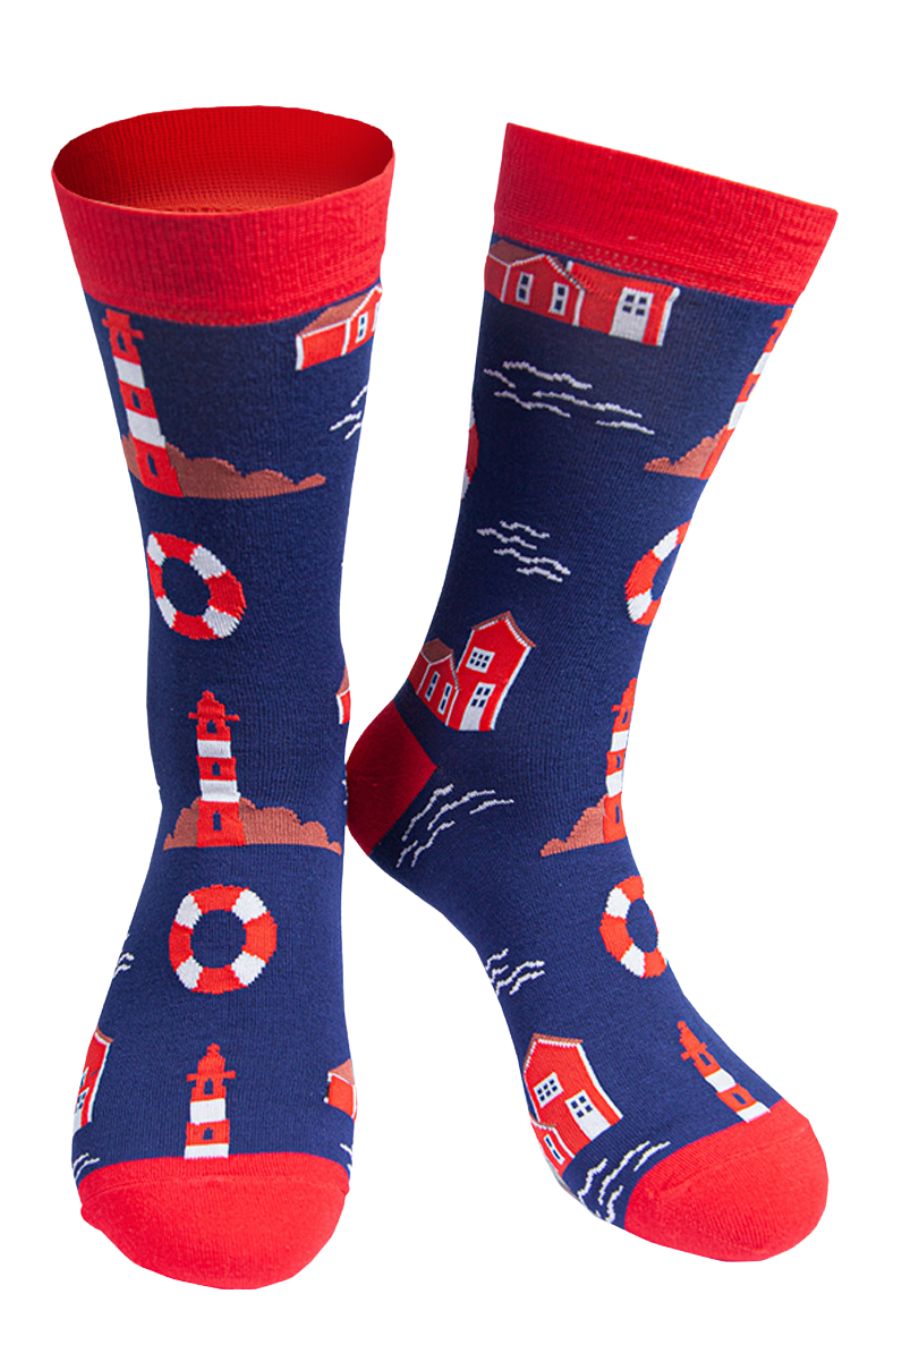 blue and red dress socks with a pattern of lighthouses and buoys